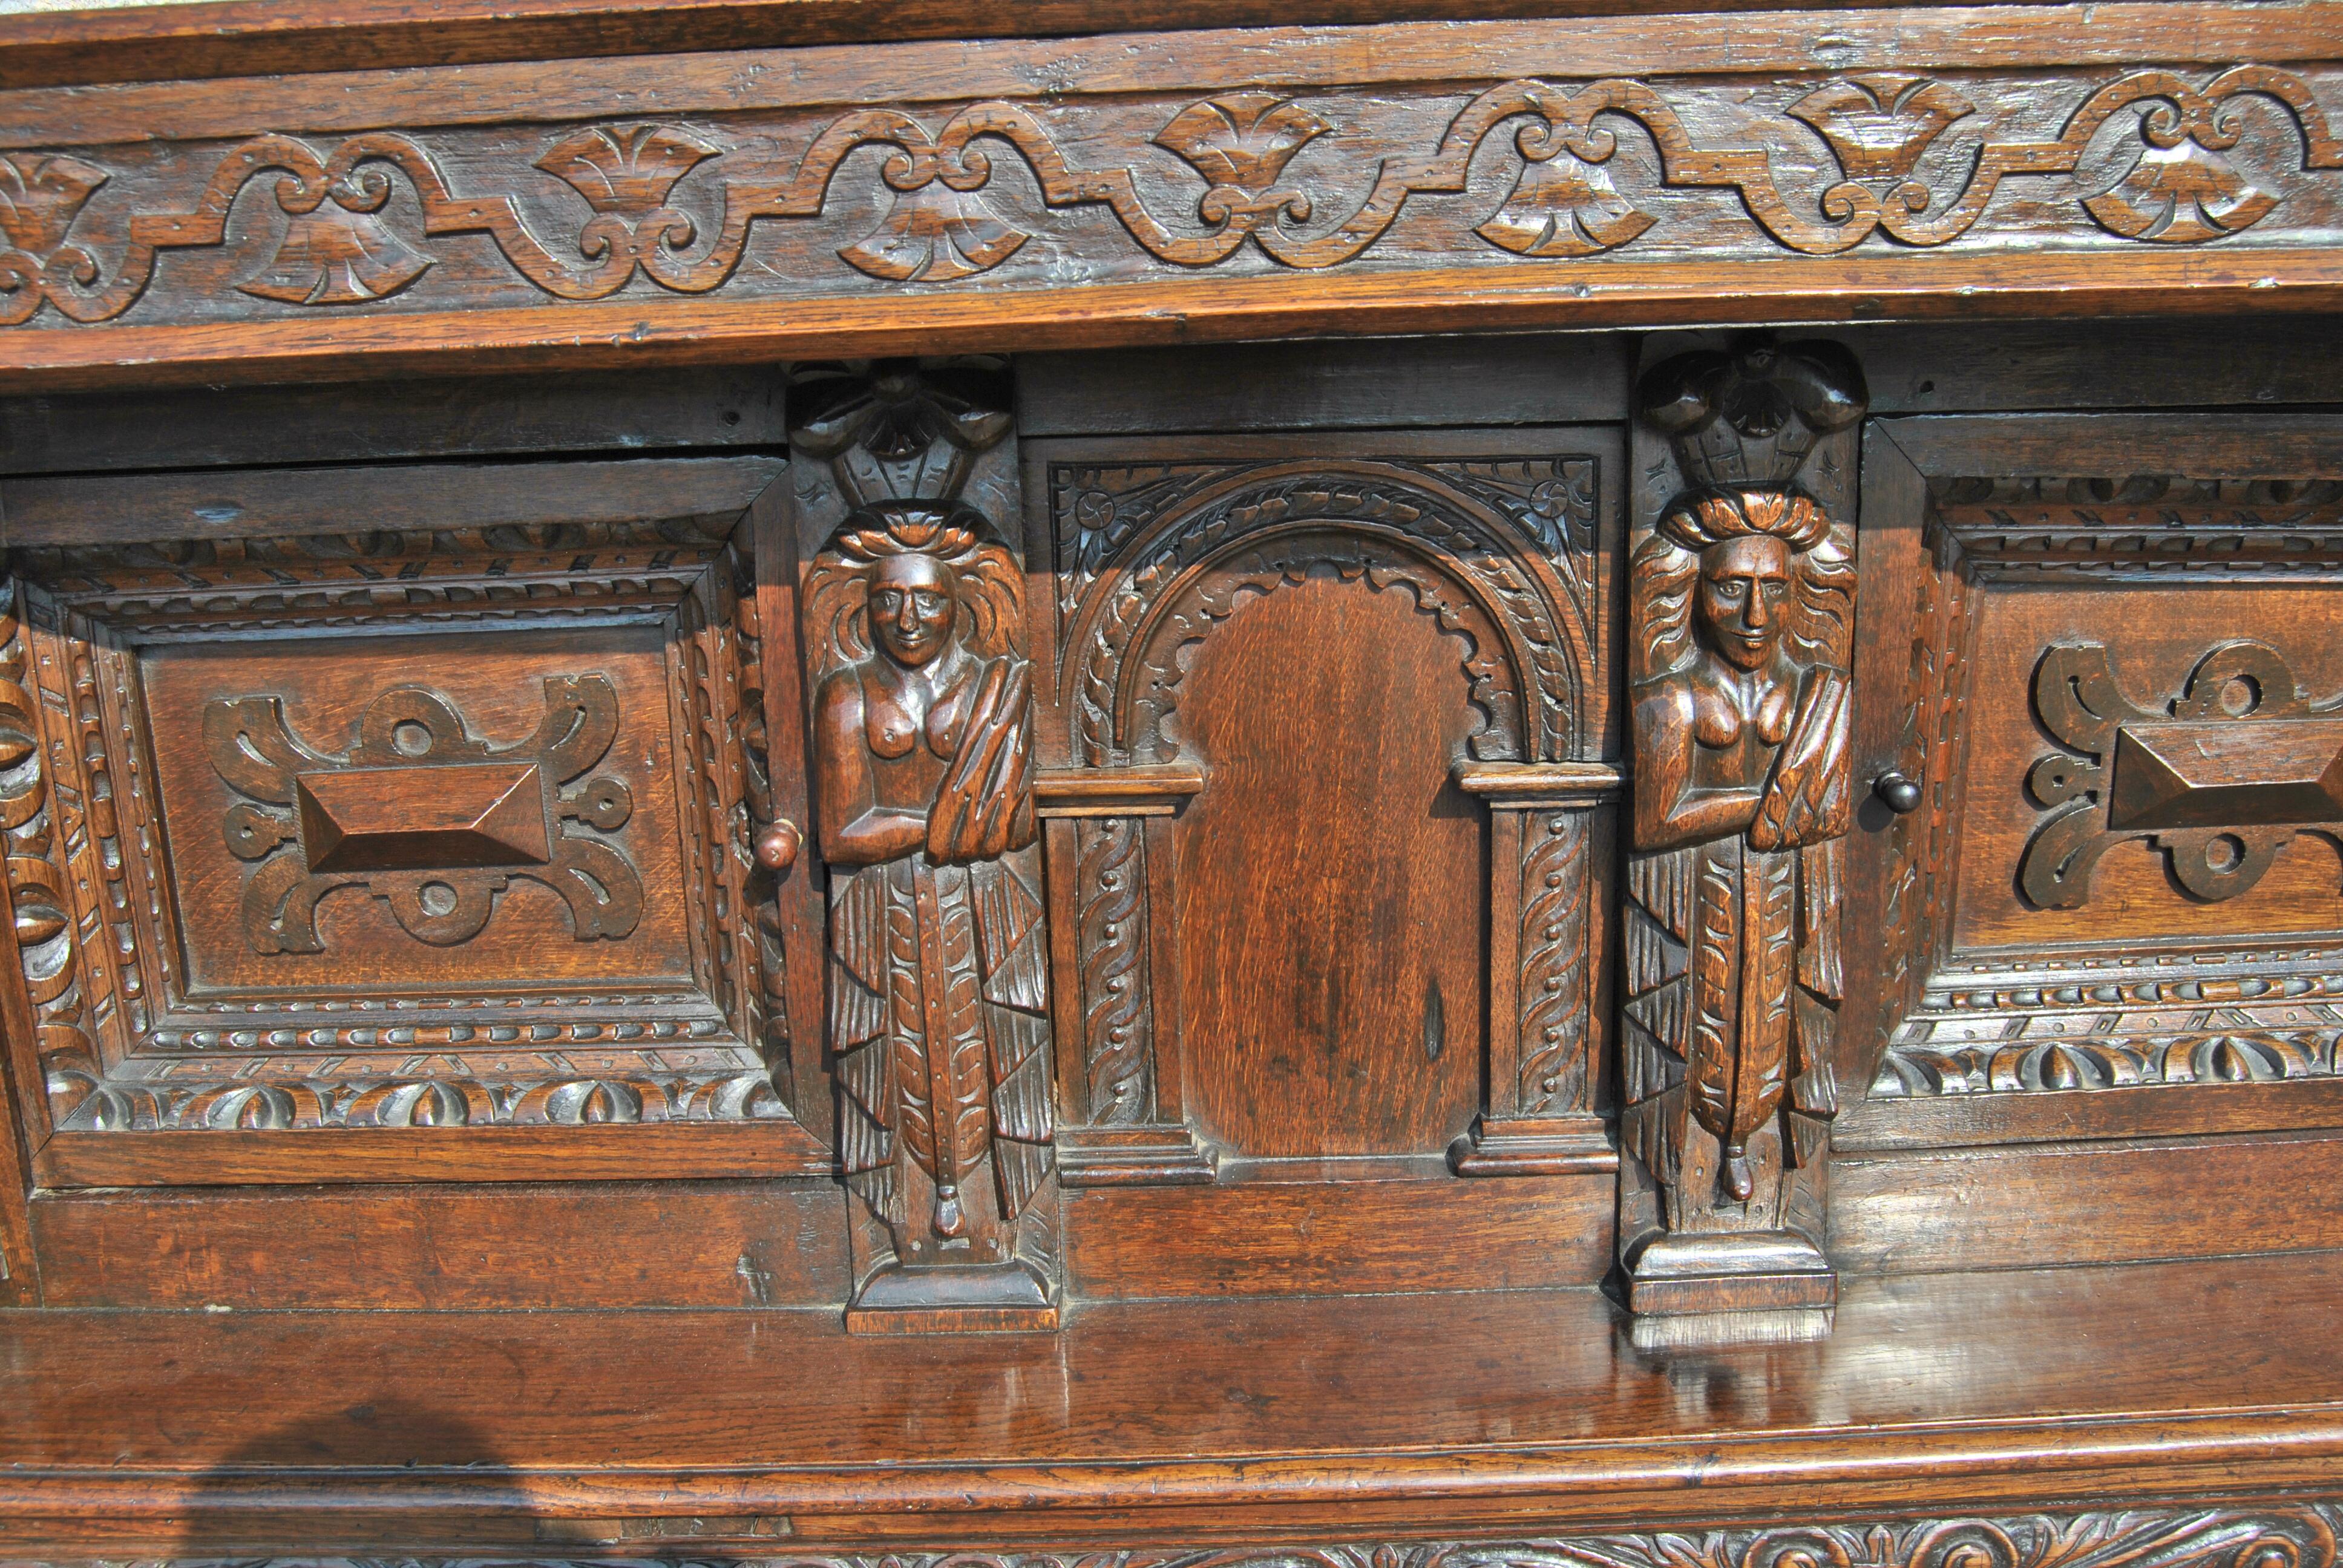 This is a solid oak court cupboard made in England, circa 1725. The top of the piece has a chamfered edge. There is a carved Corinthian topped column on the right and left front. There are 2 doors with deeply recessed hand carving. There is an Atlas